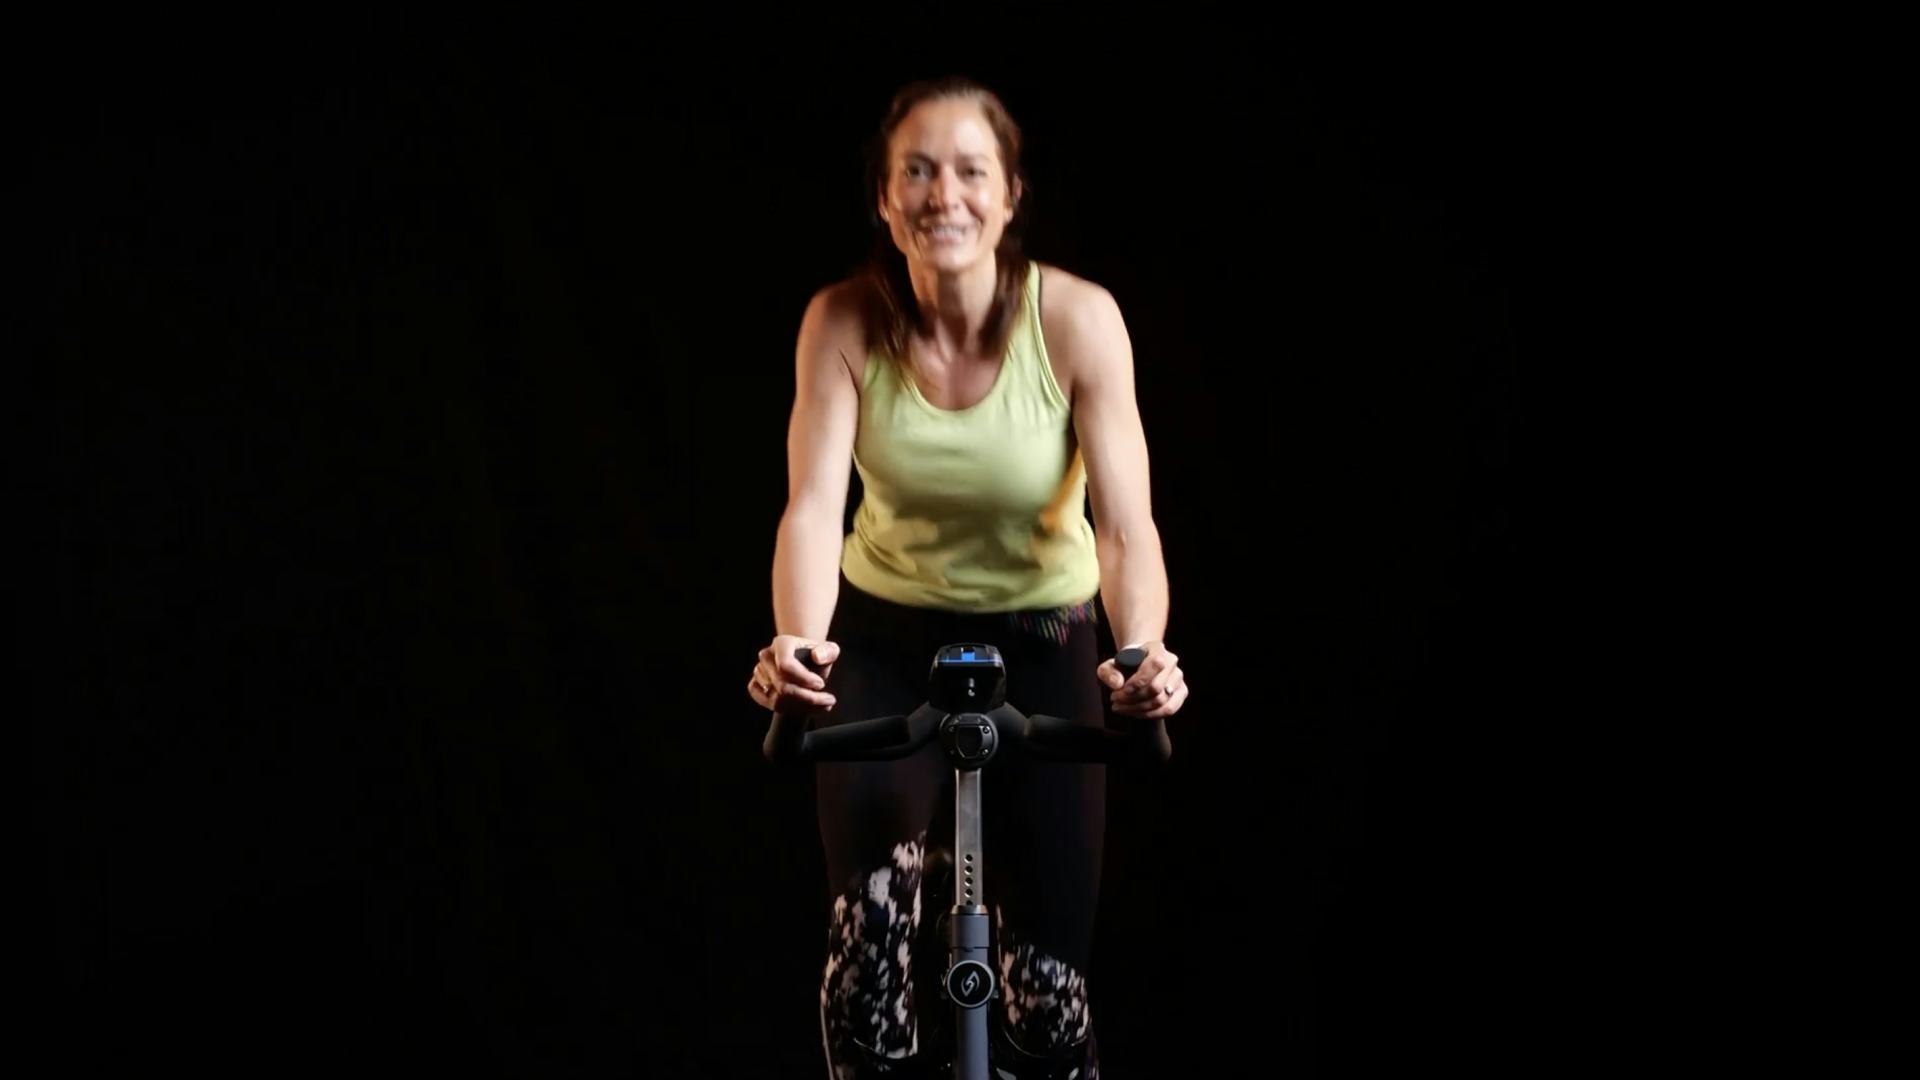 Gentle Peaks and Pace Indoor Cycling by Laura